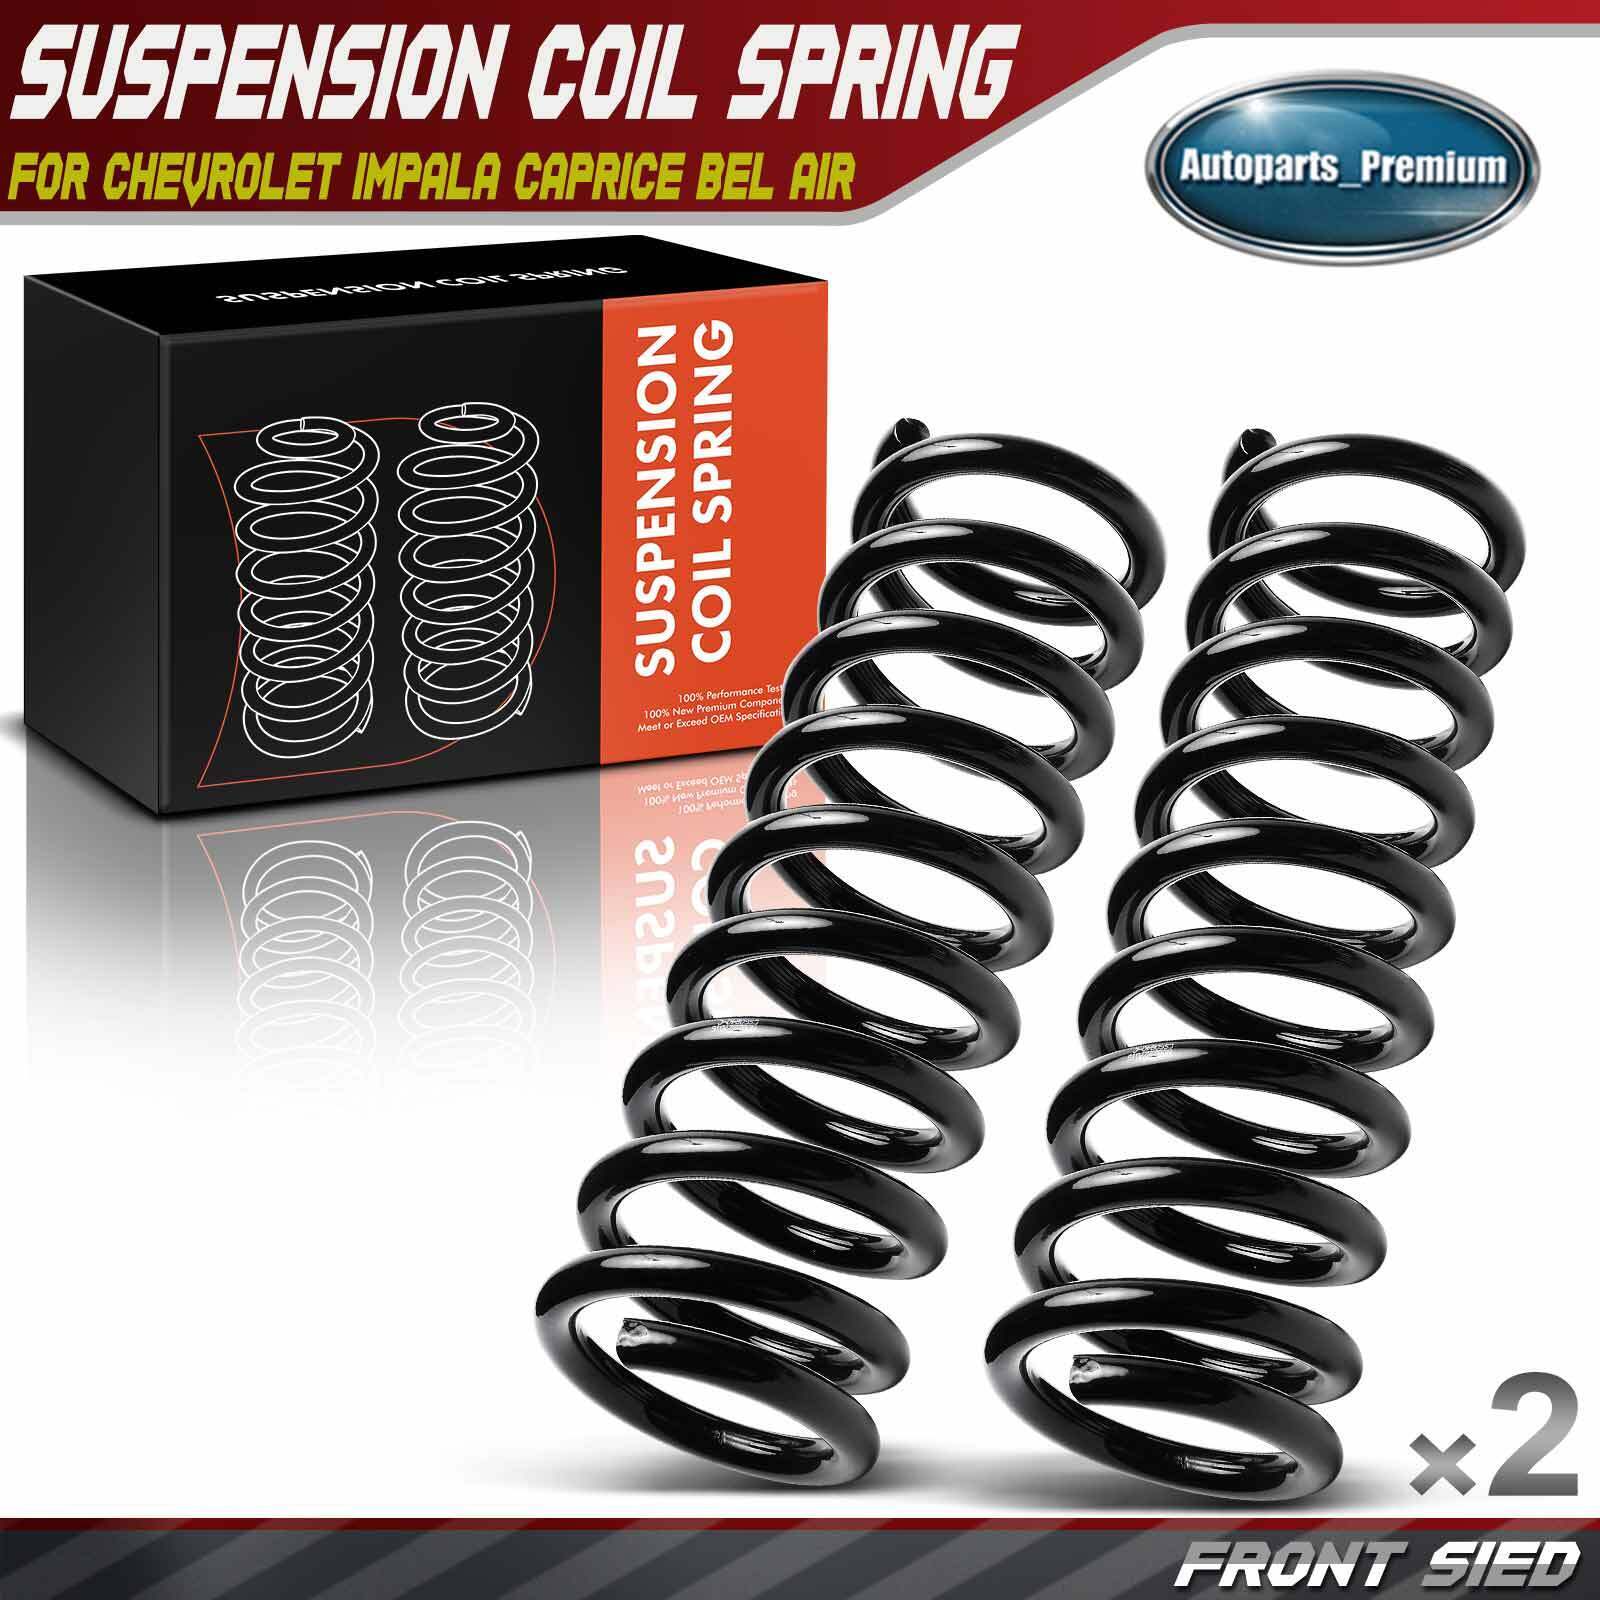 2Pcs Front Coil Springs for Chevy Impala Caprice Bel Air Biscayne Sedan Delivery